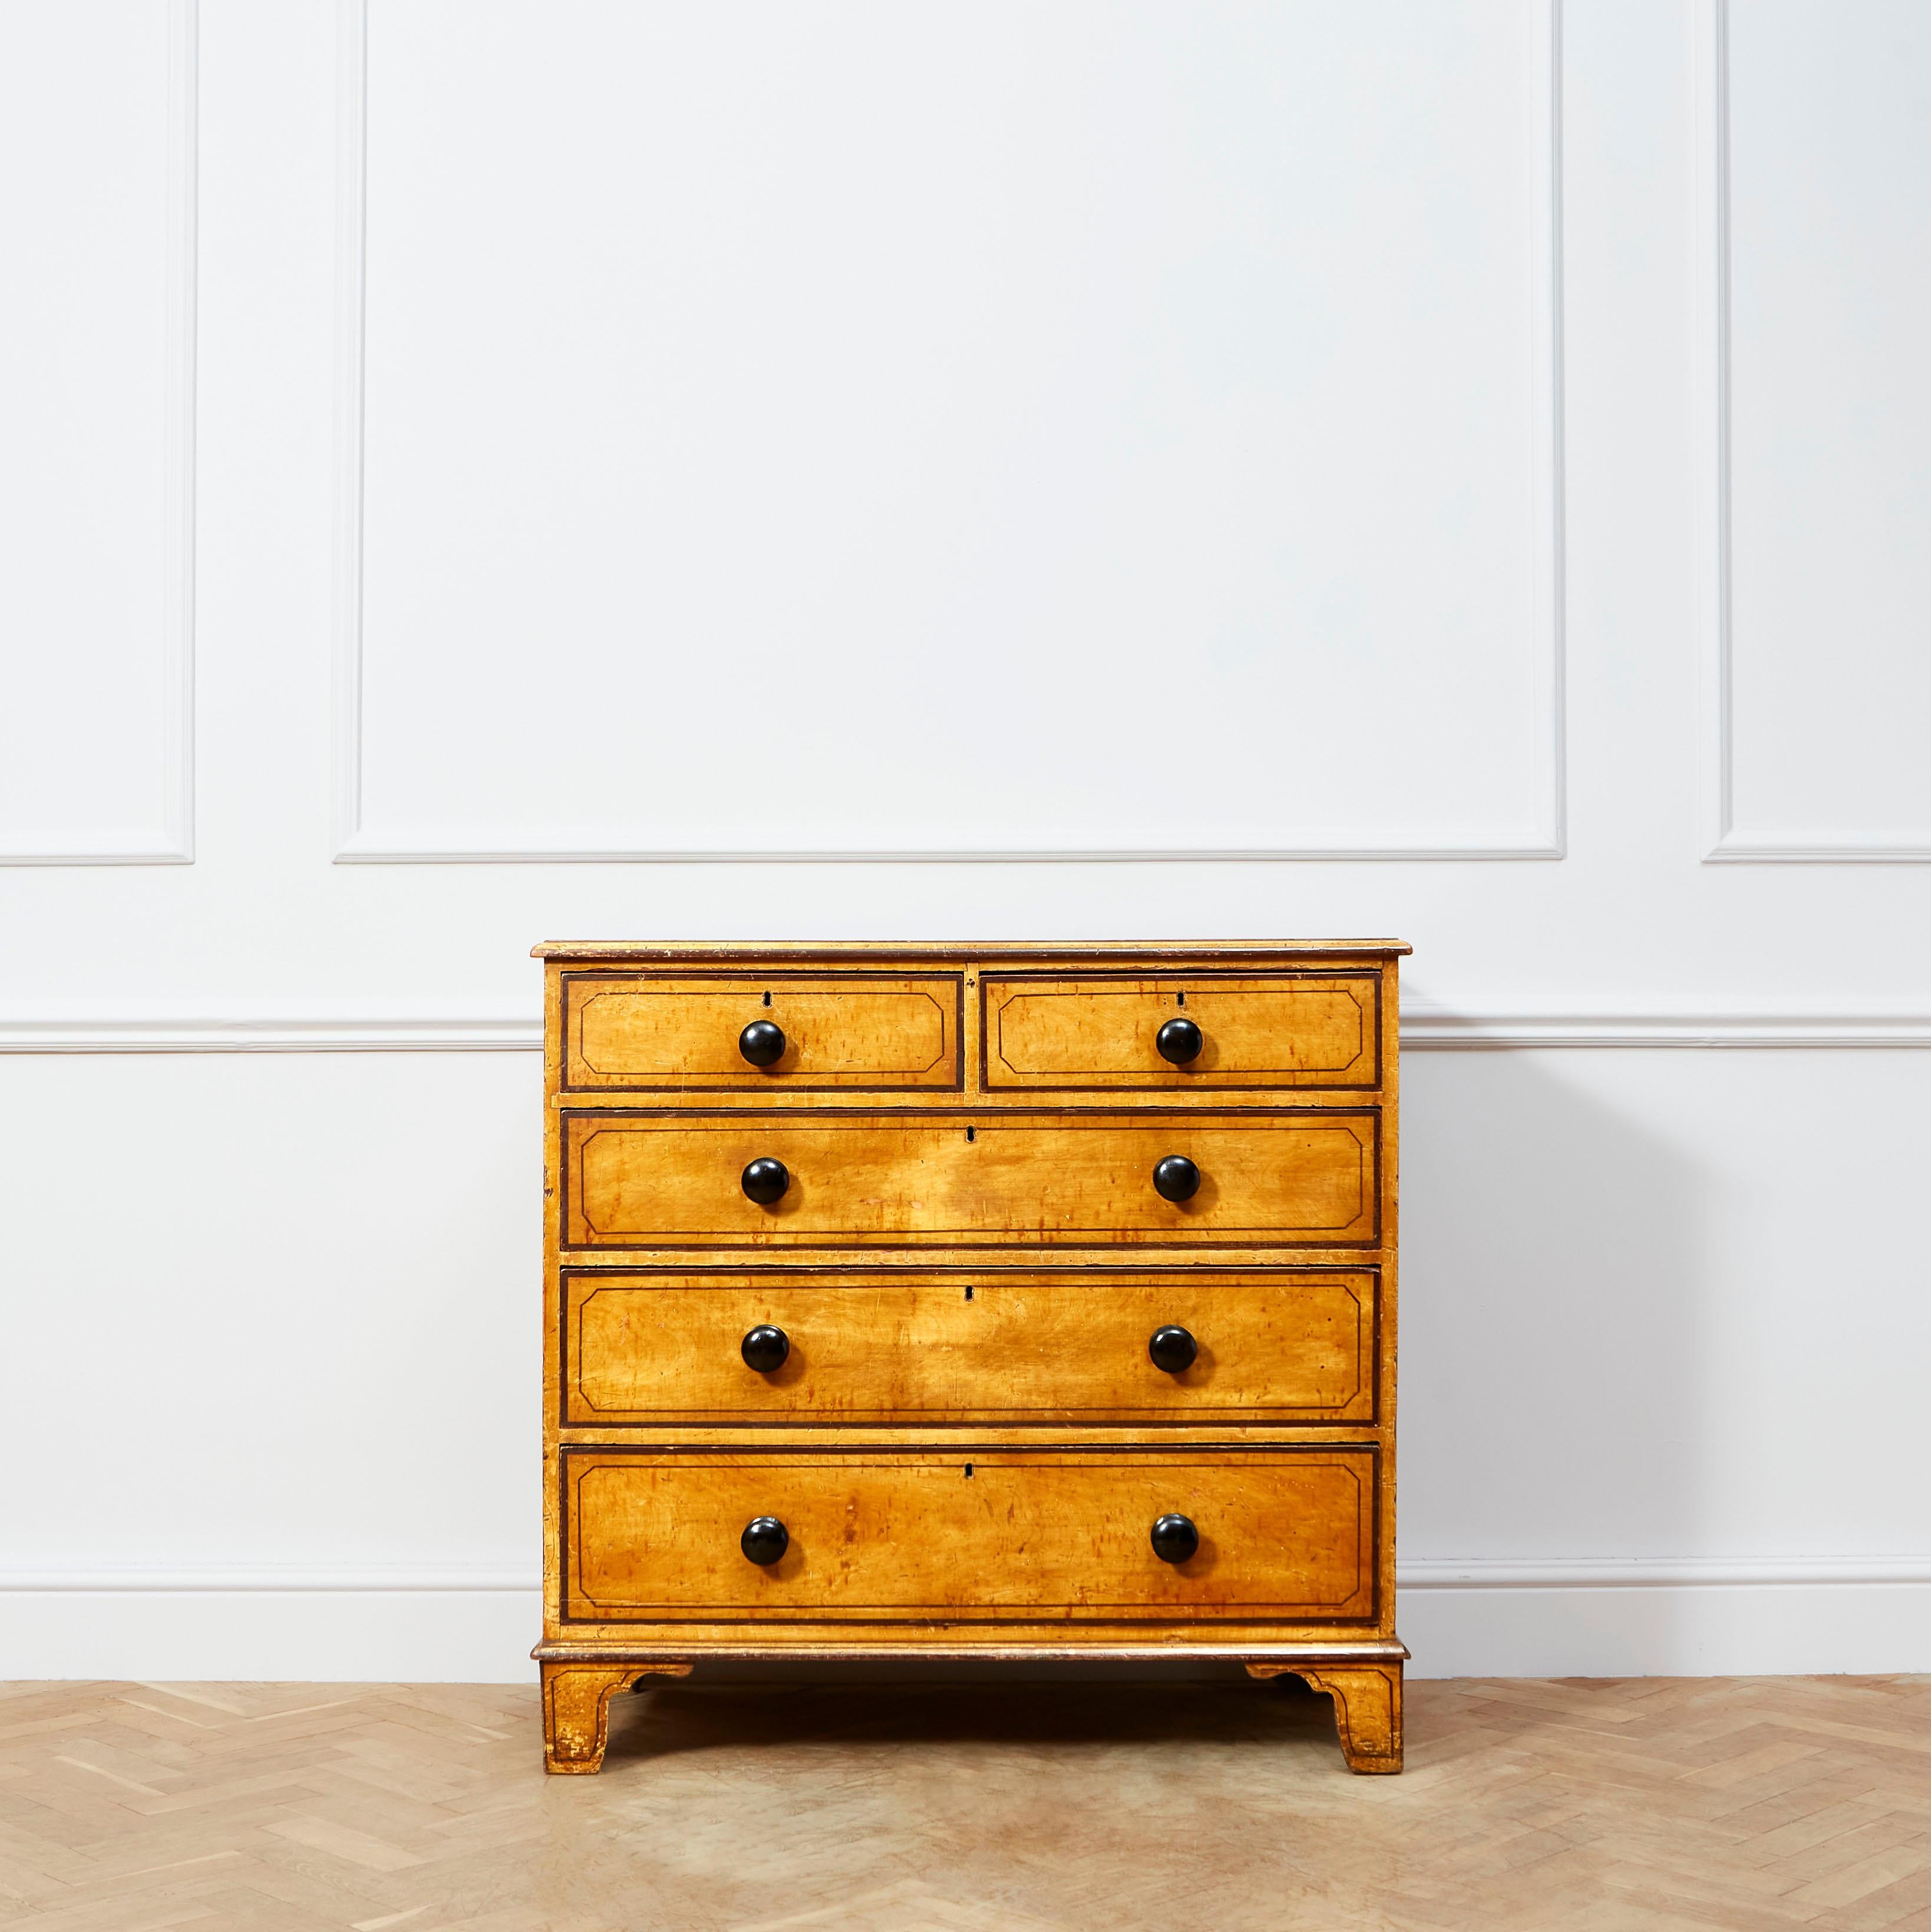 An early nineteenth century painted pine chest of drawers, wonderfully proportioned and in excellent serviceable condition.

English, early nineteenth century